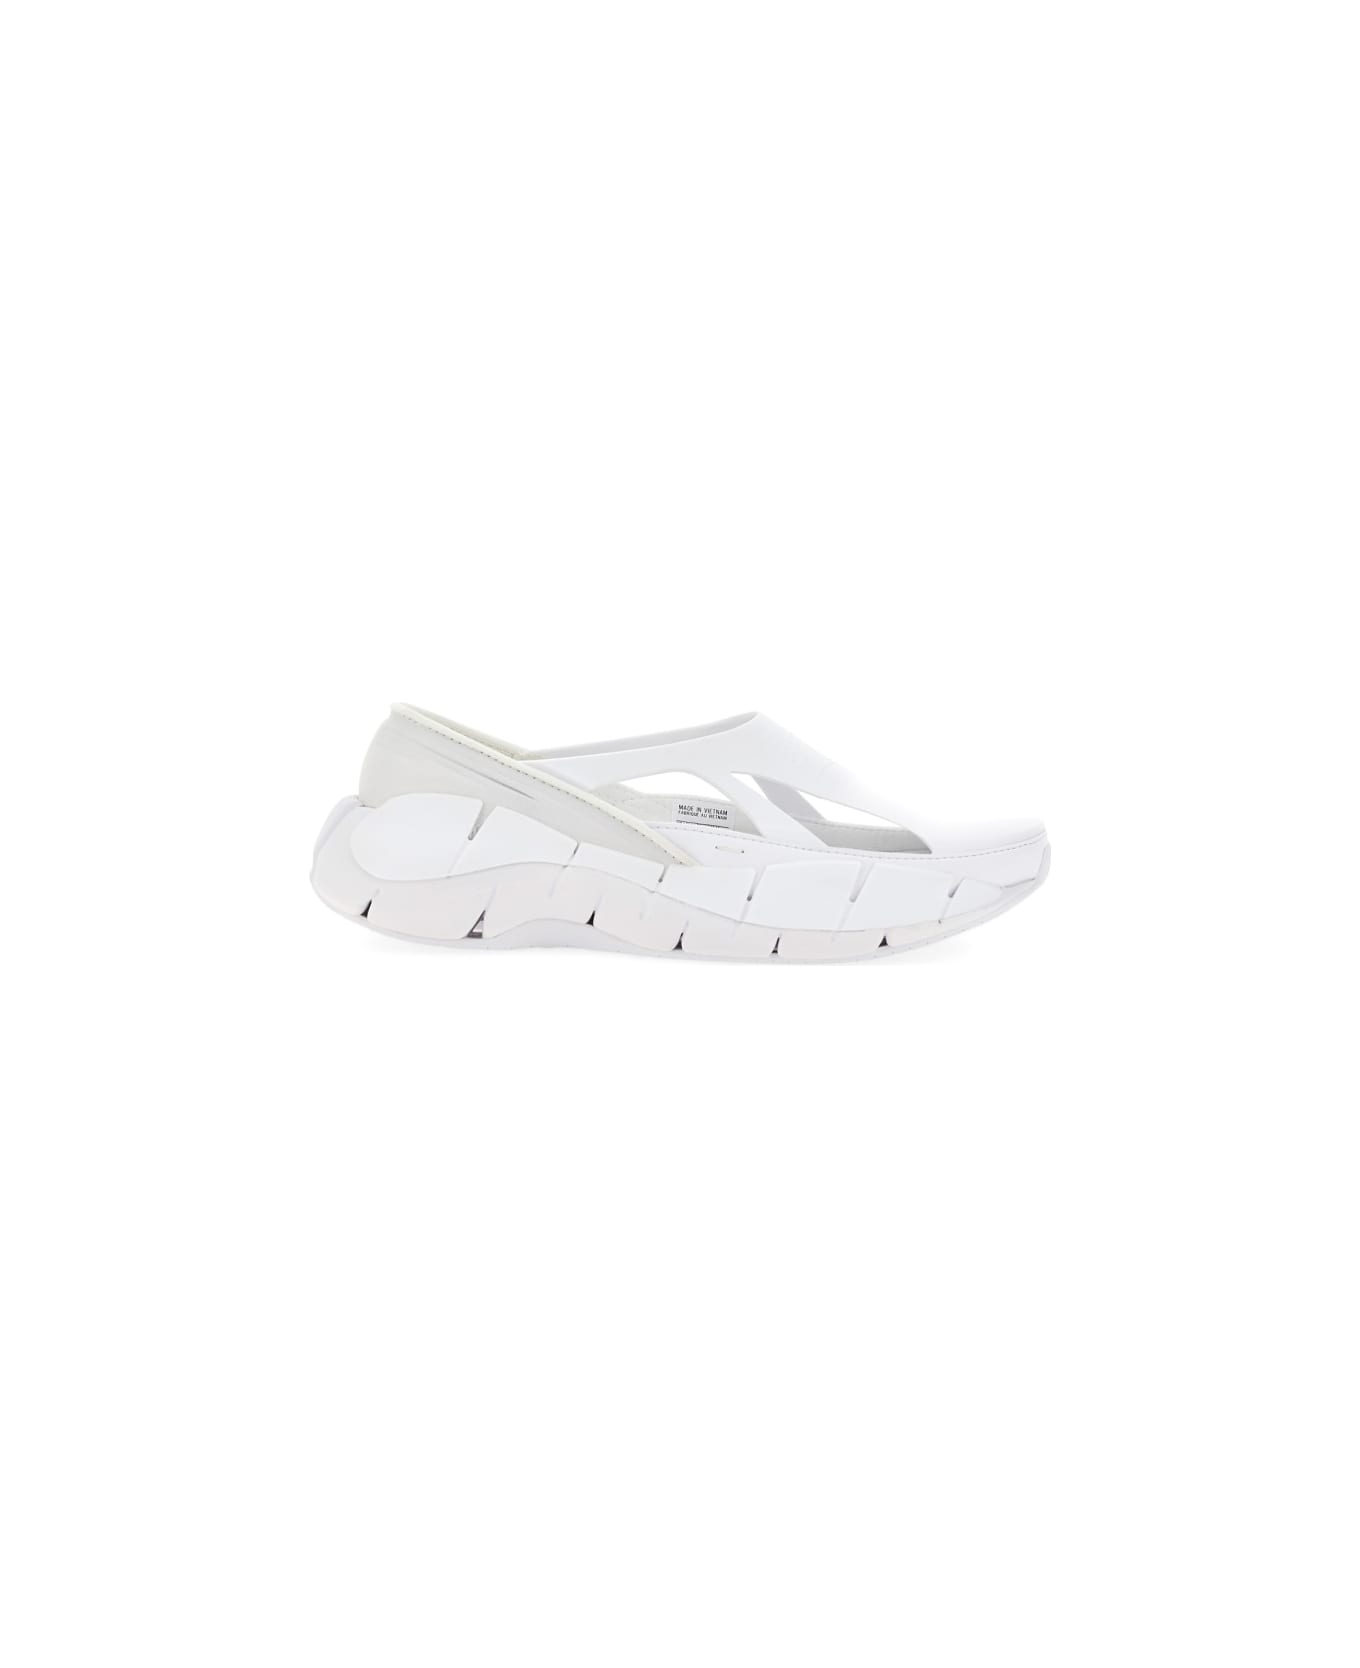 Maison Margiela Sneakers Project 0 Cr - WHITE